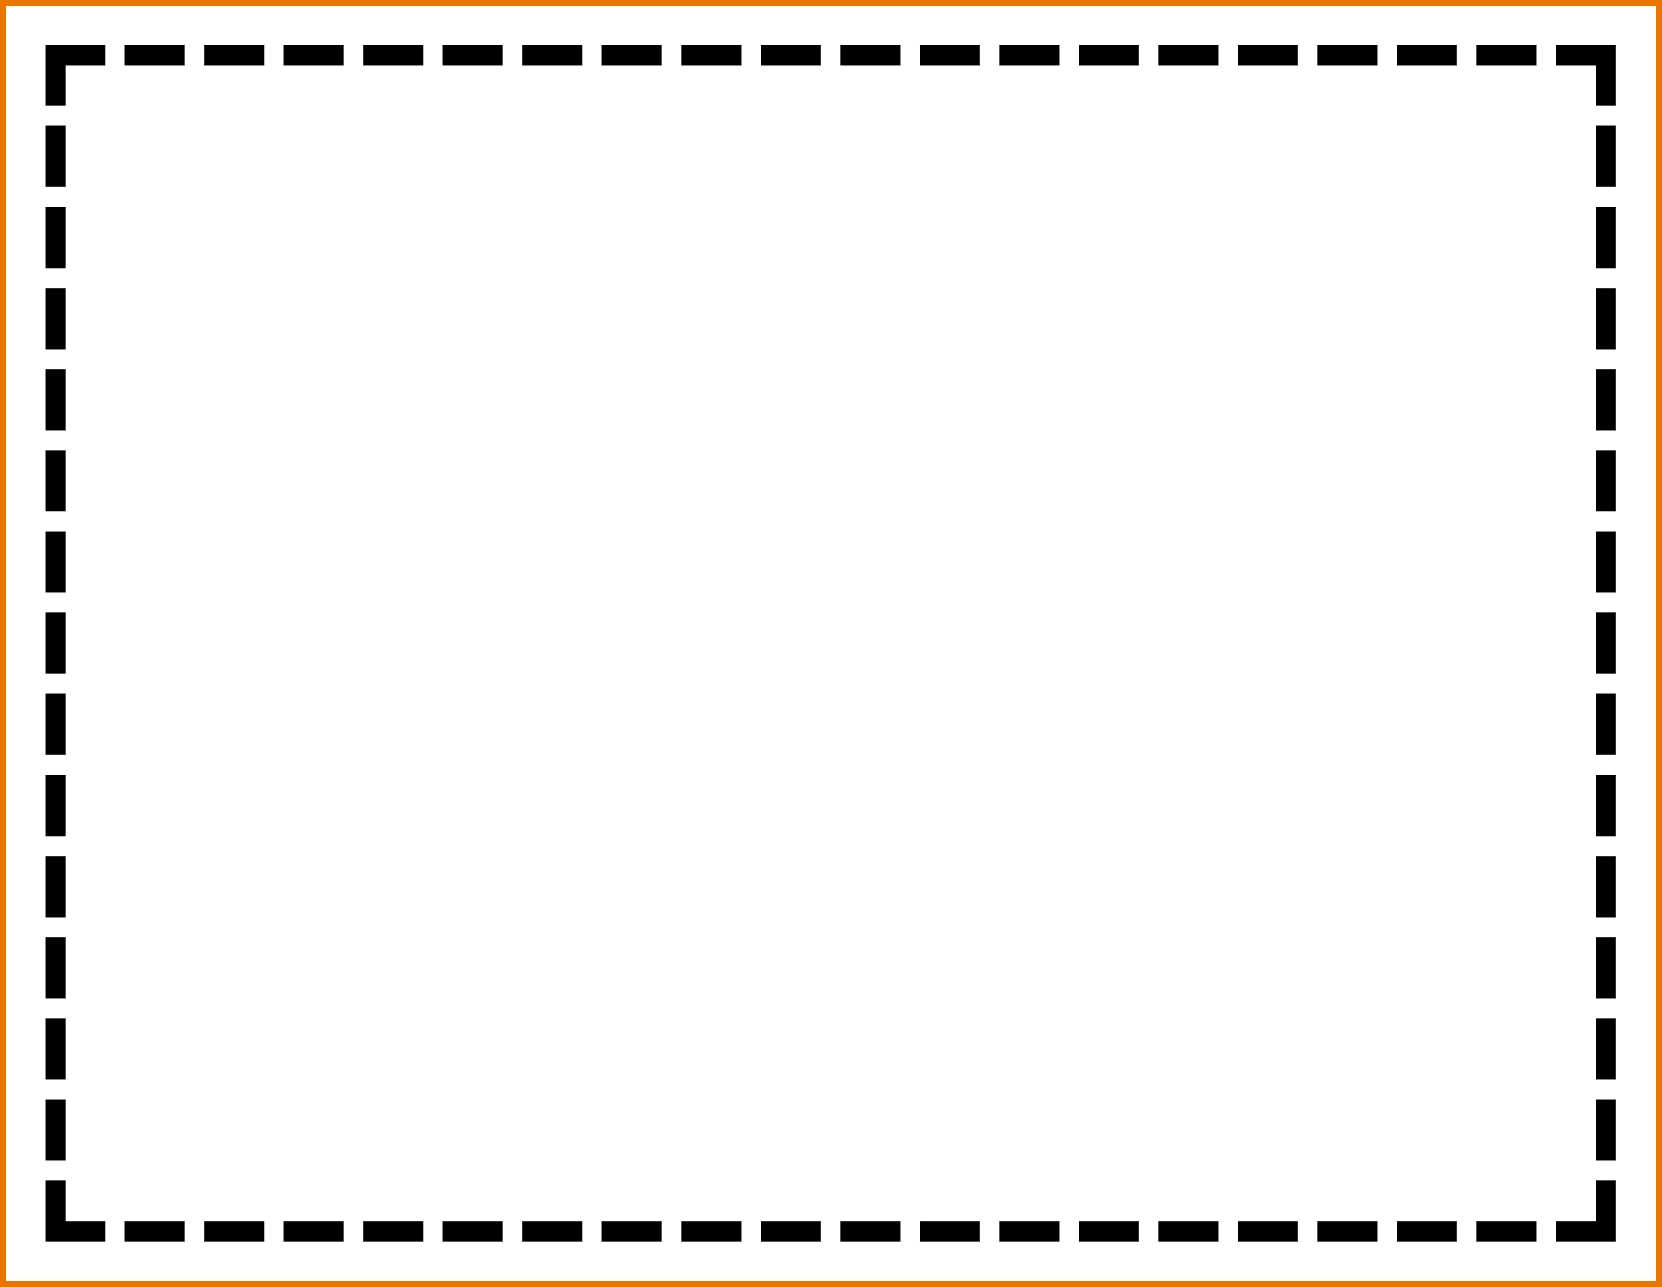 Blank Coupon Png